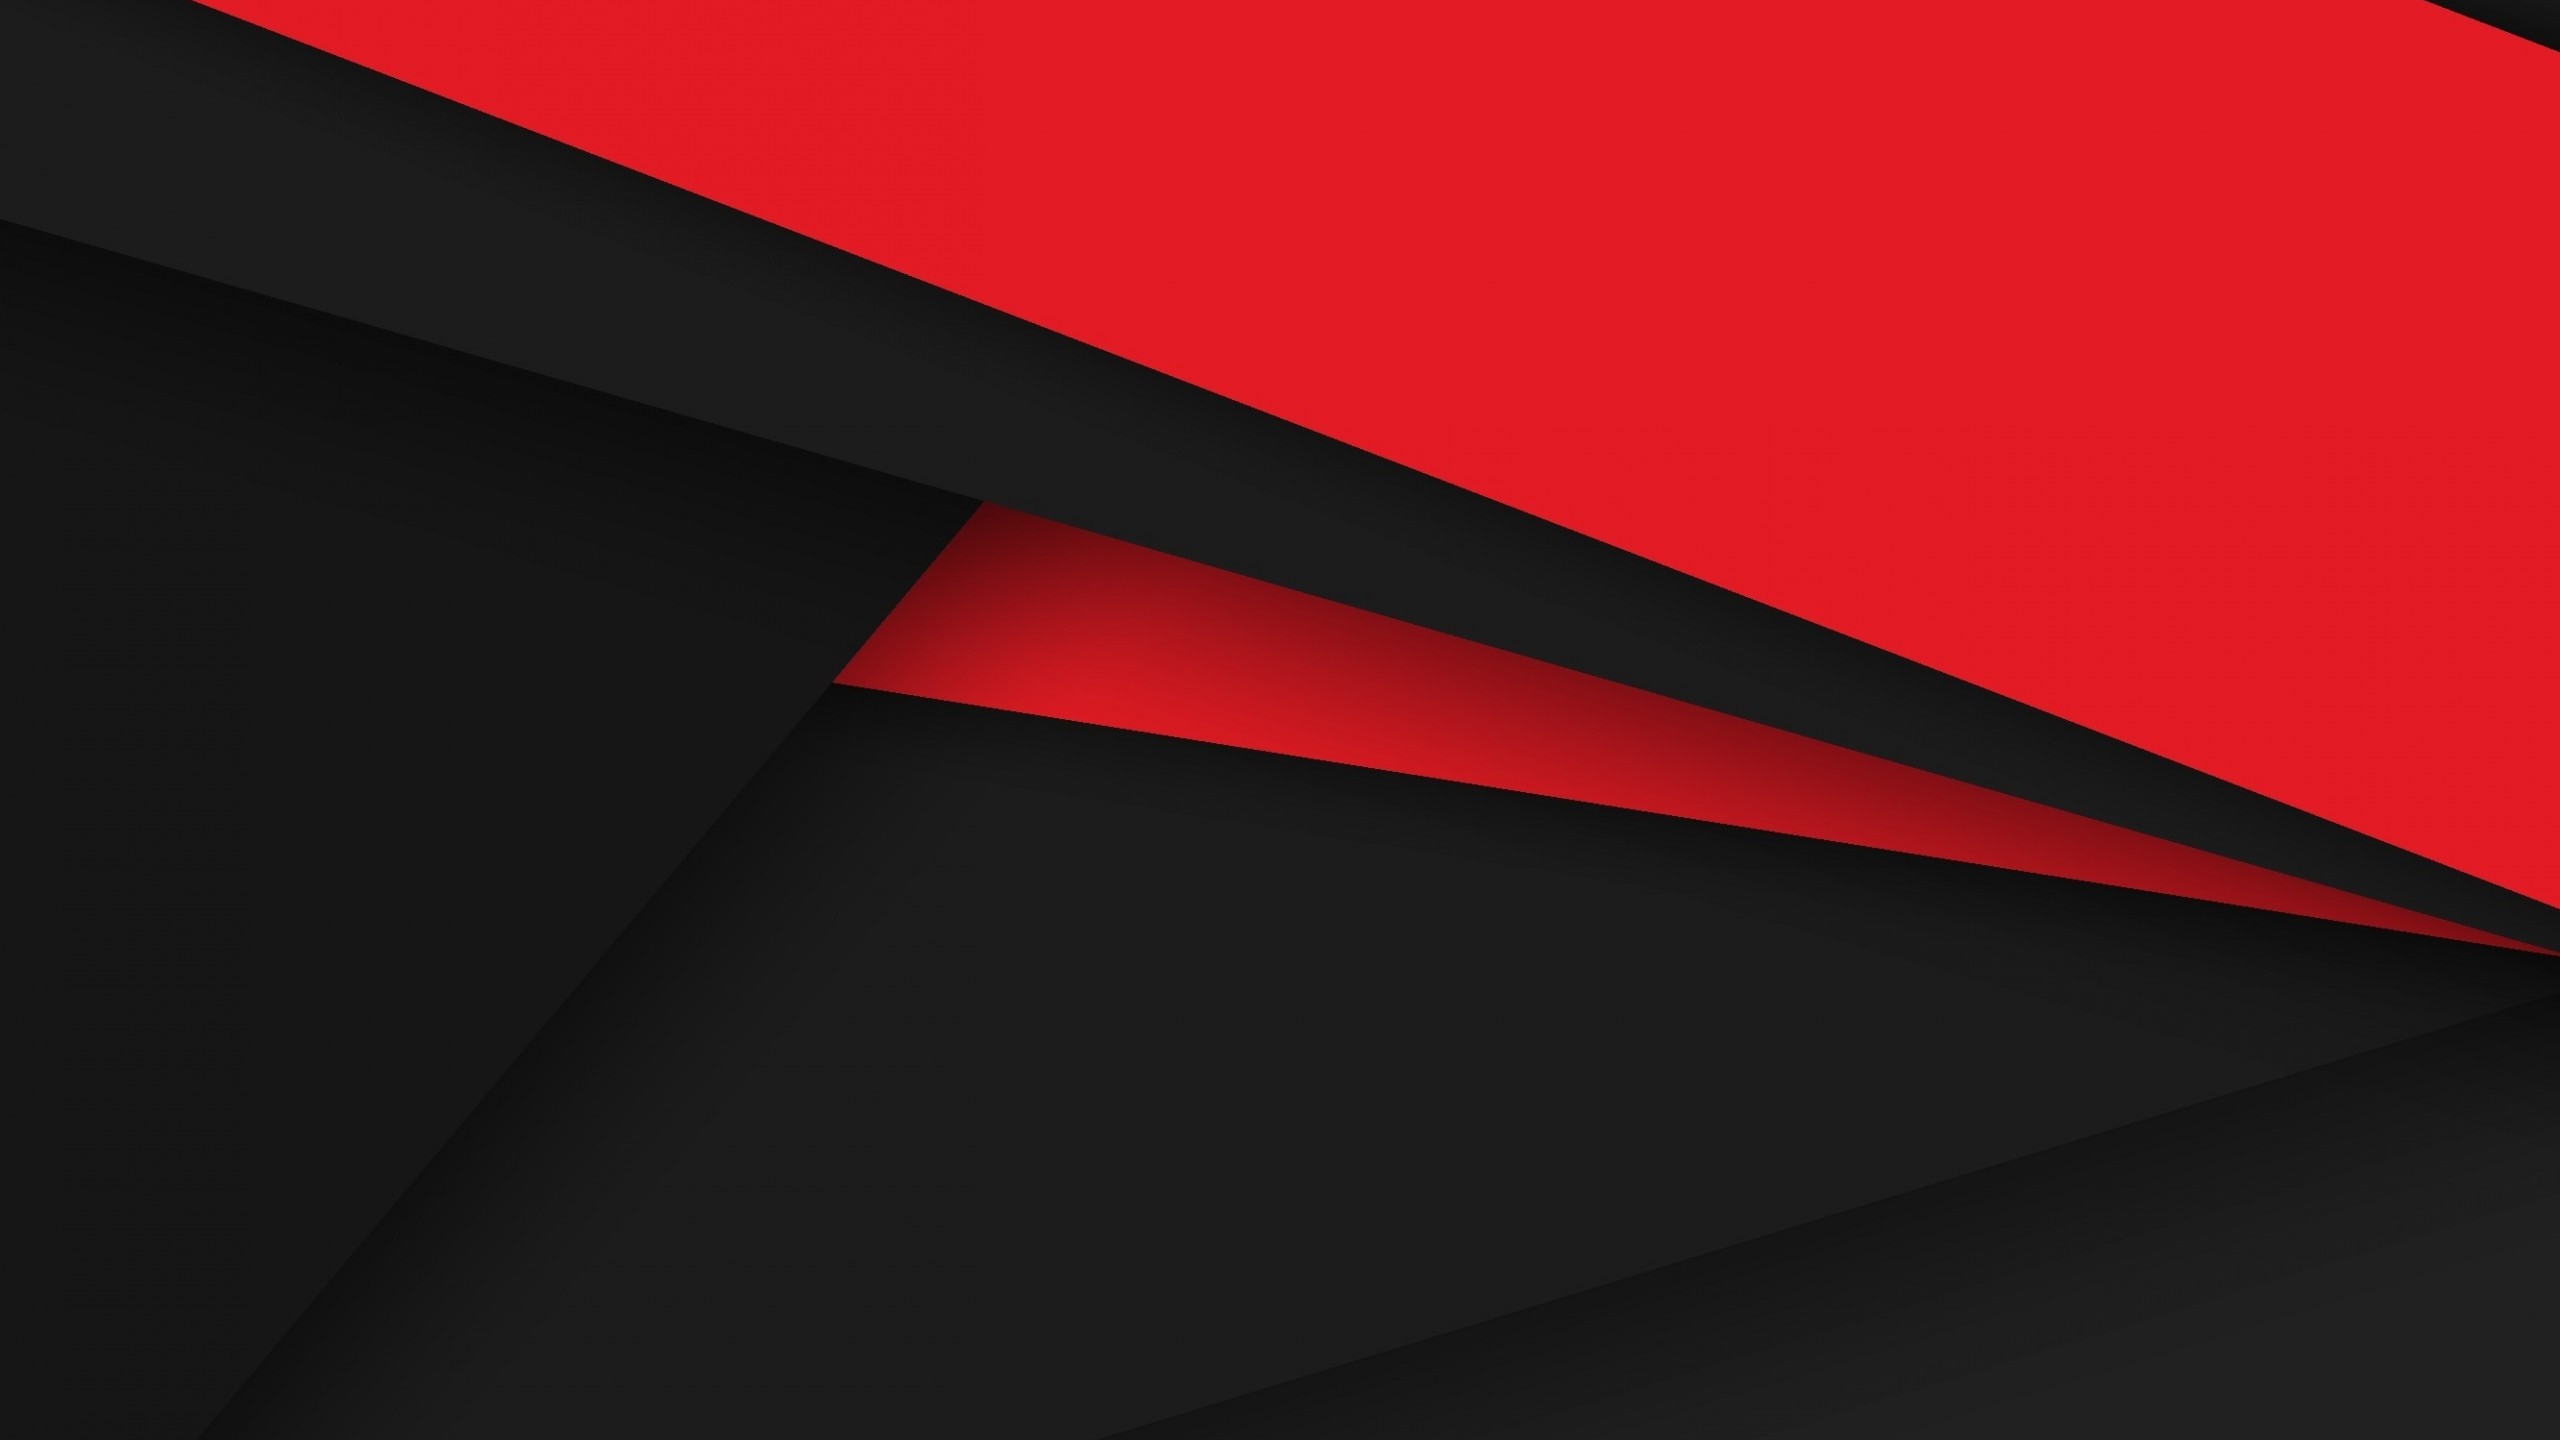 Red and black wallpaper